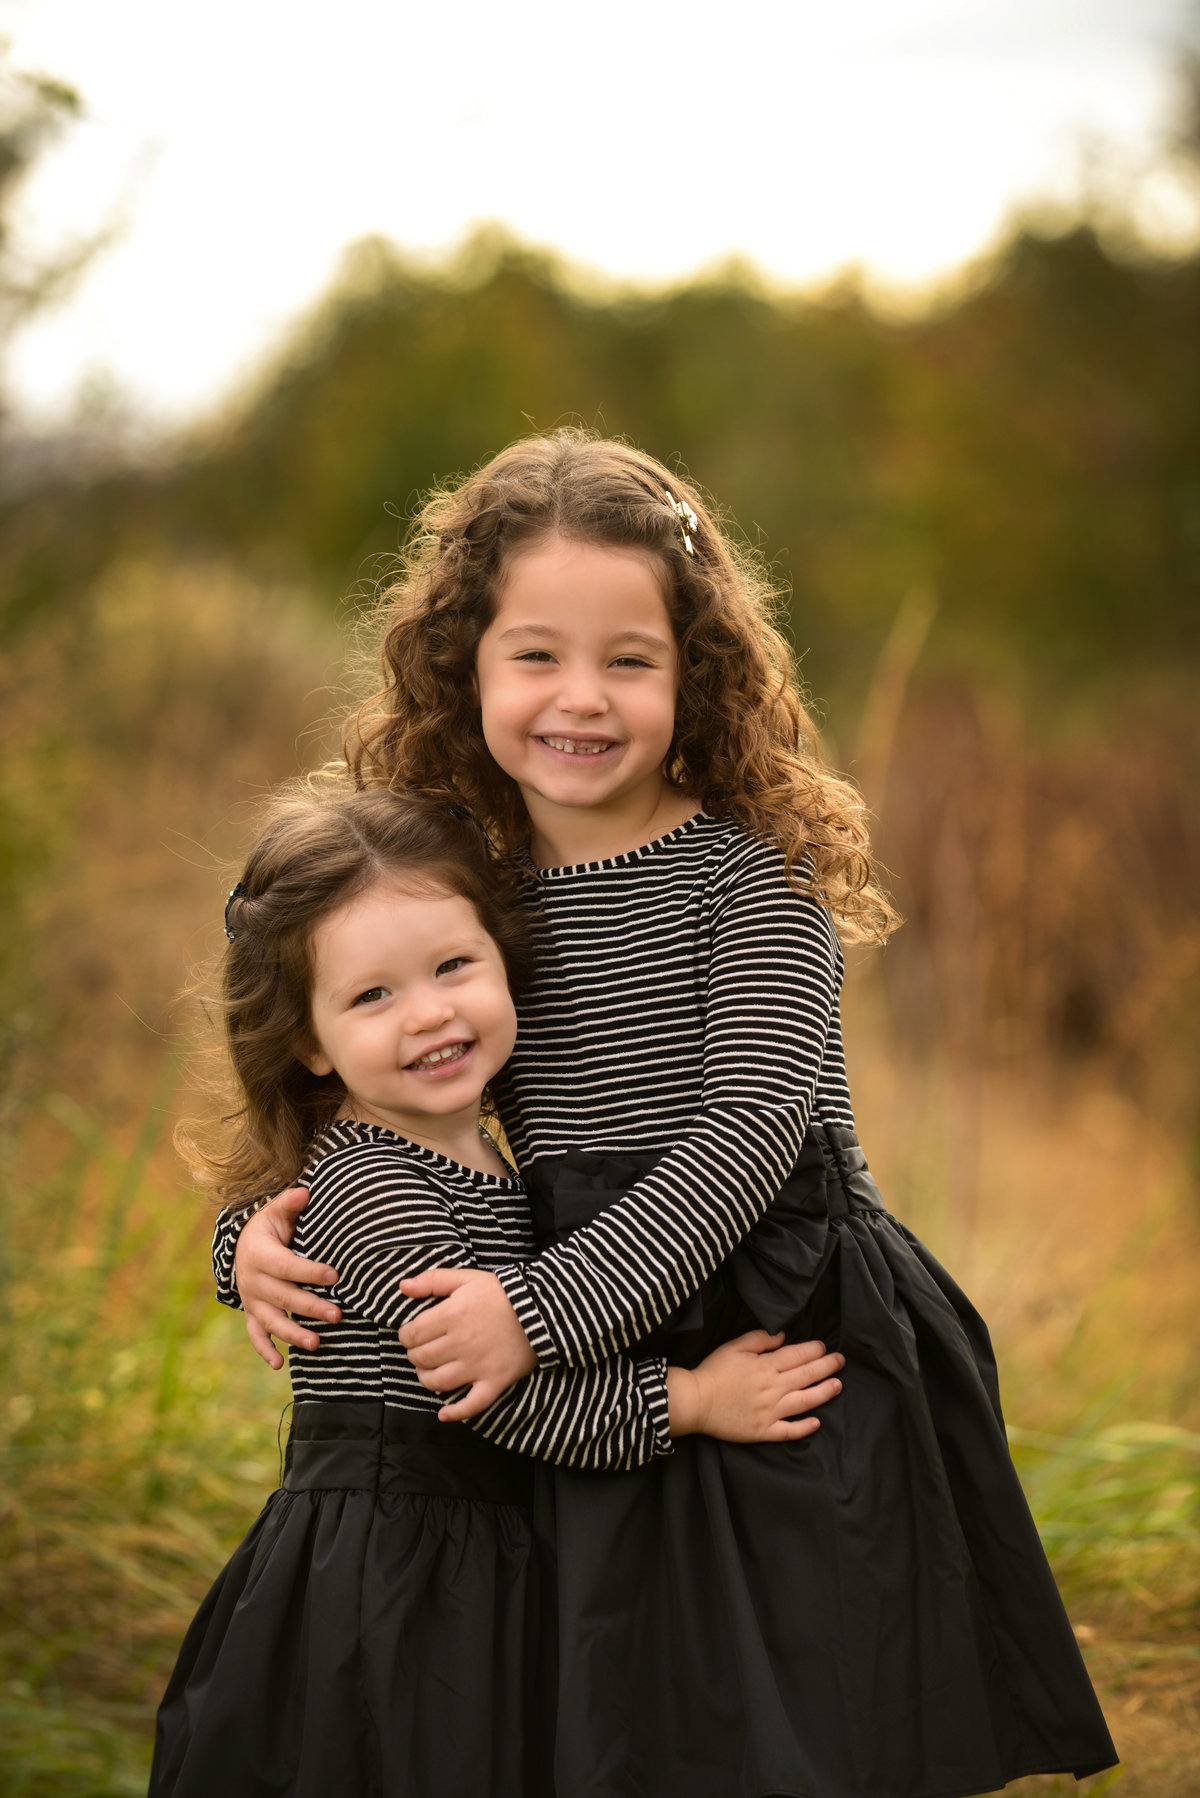 Sweet sisters during their family photo shoot in Baltimore, MD